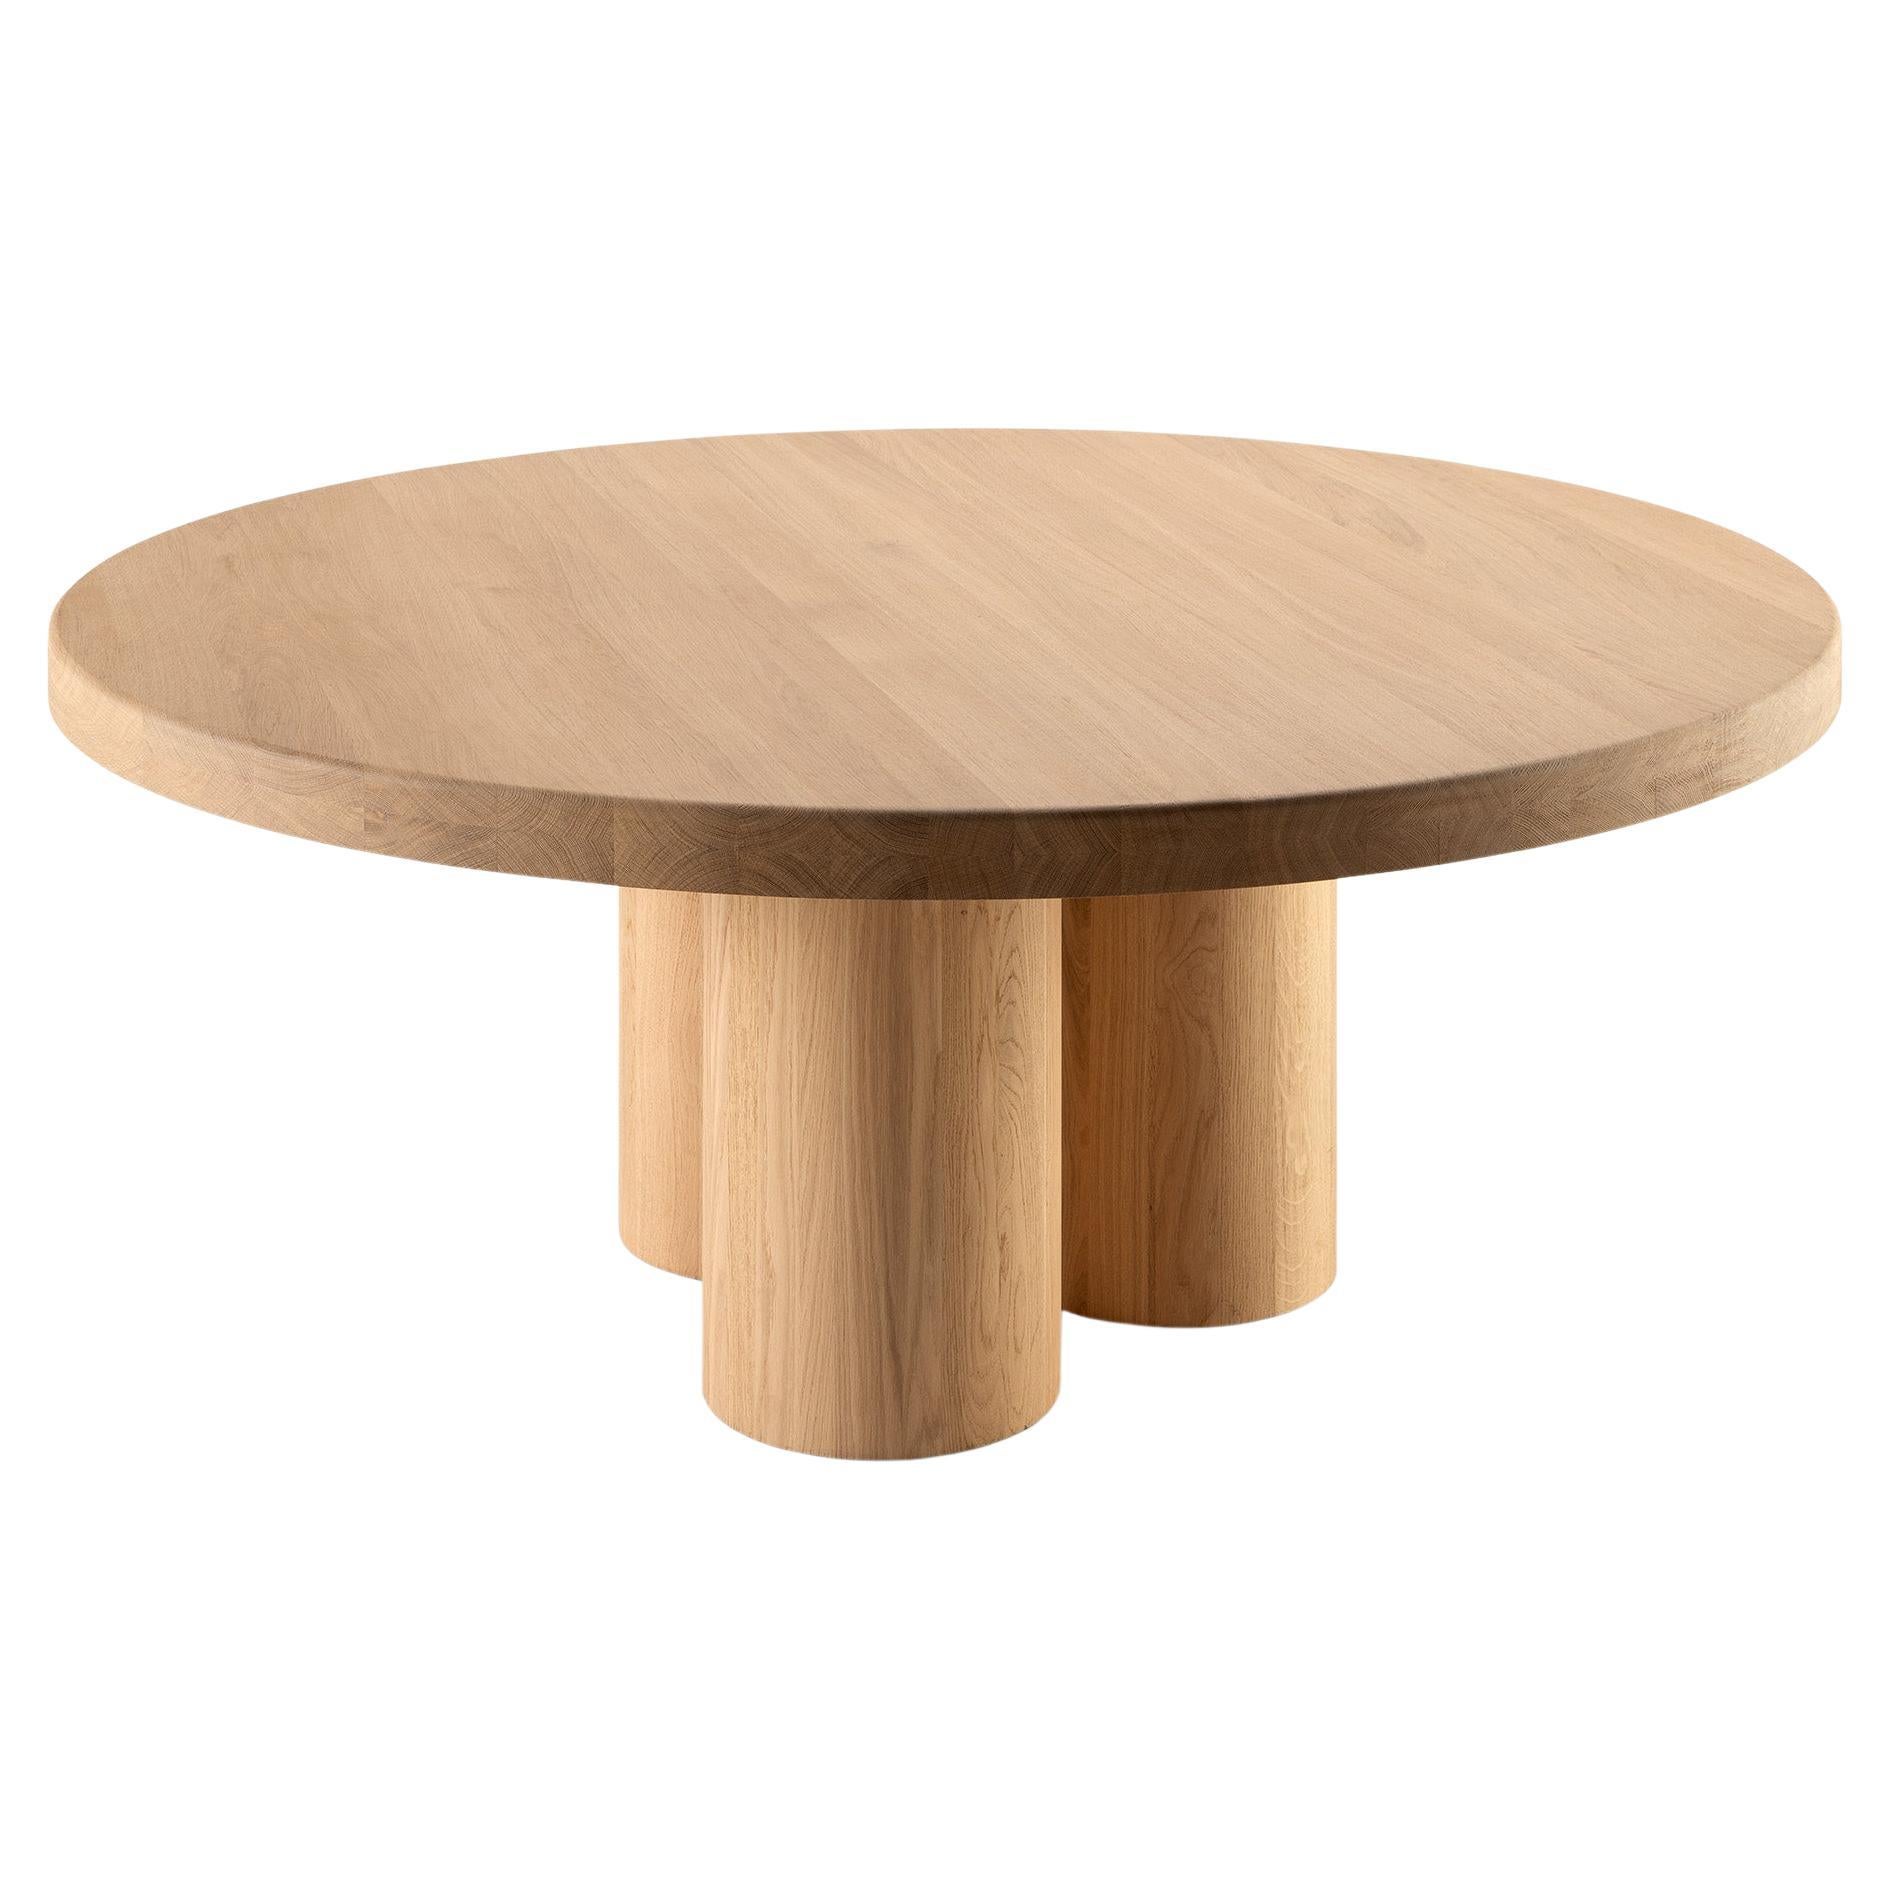 Kluskens Thick-Wood Dining Table For Sale